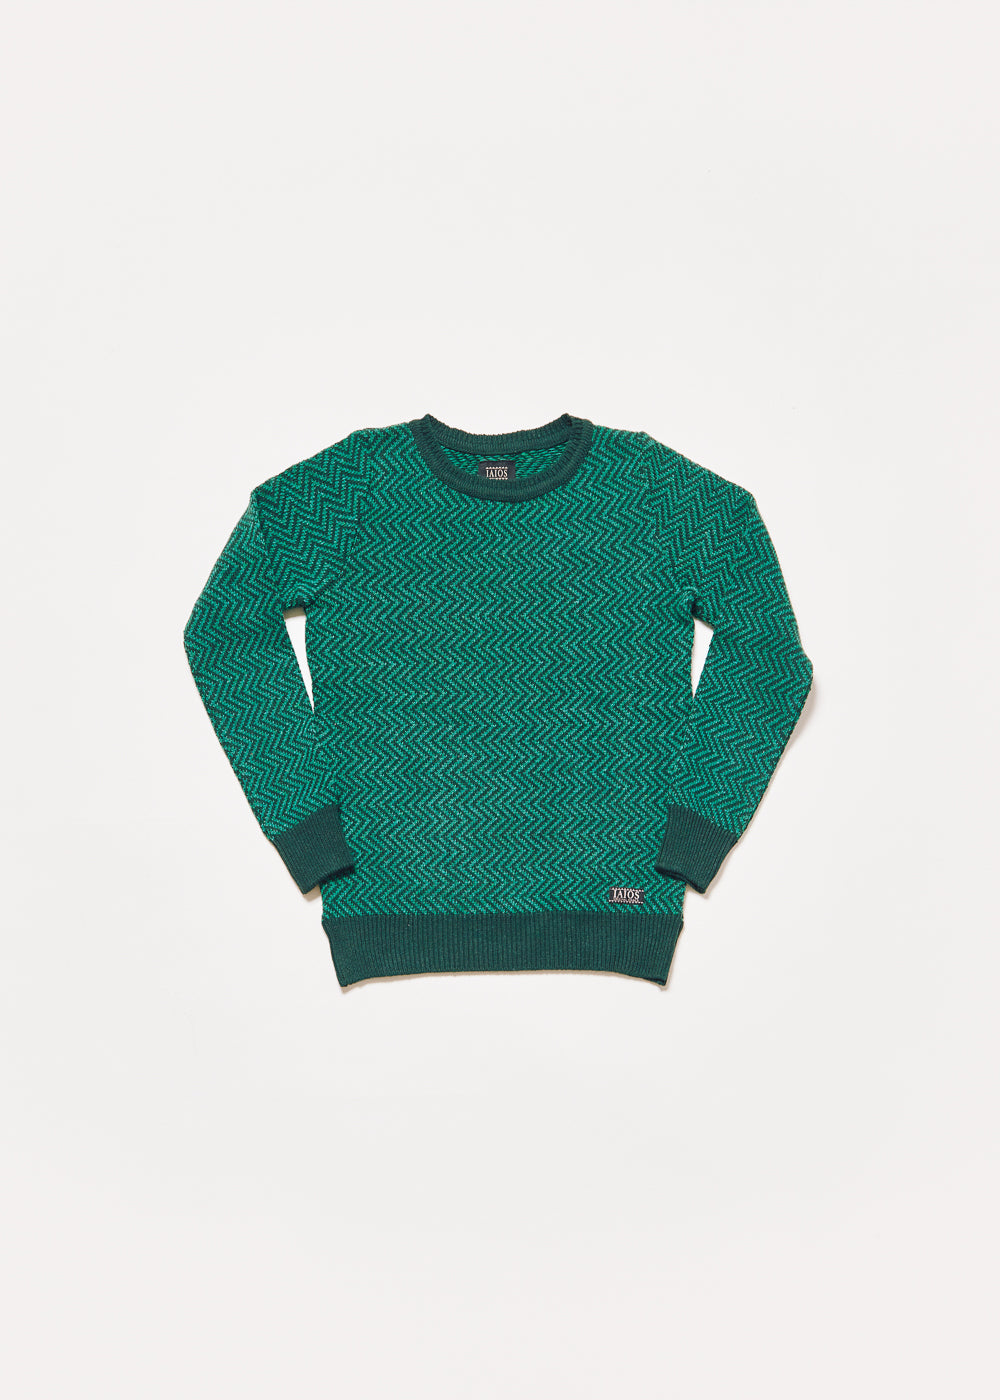 Women's or unisex green knitted sweater. The design is very simple and consists of a zigzag in fine lines of bottle green and dark green.